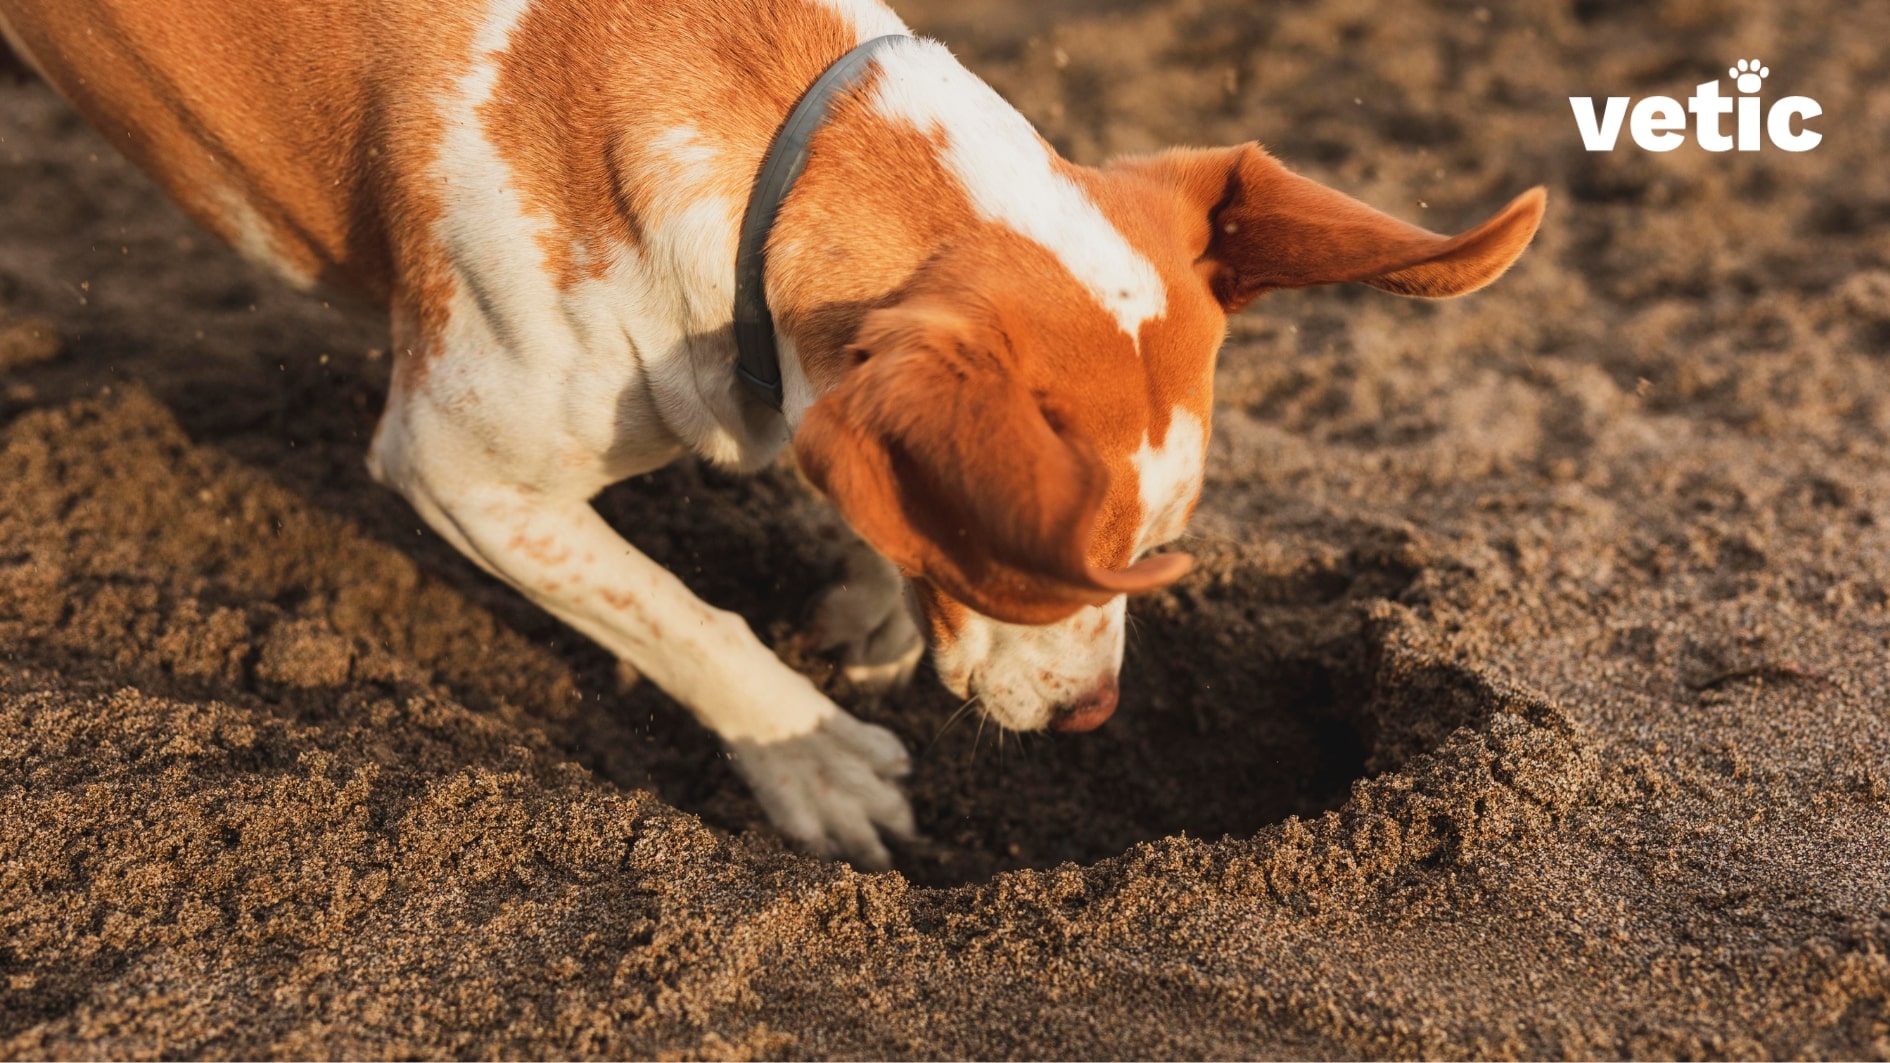 Mixed breed dog with brown and white patches, and a black collar is digging loose soil. Roundworms in dogs can come from contaminated soil easily.